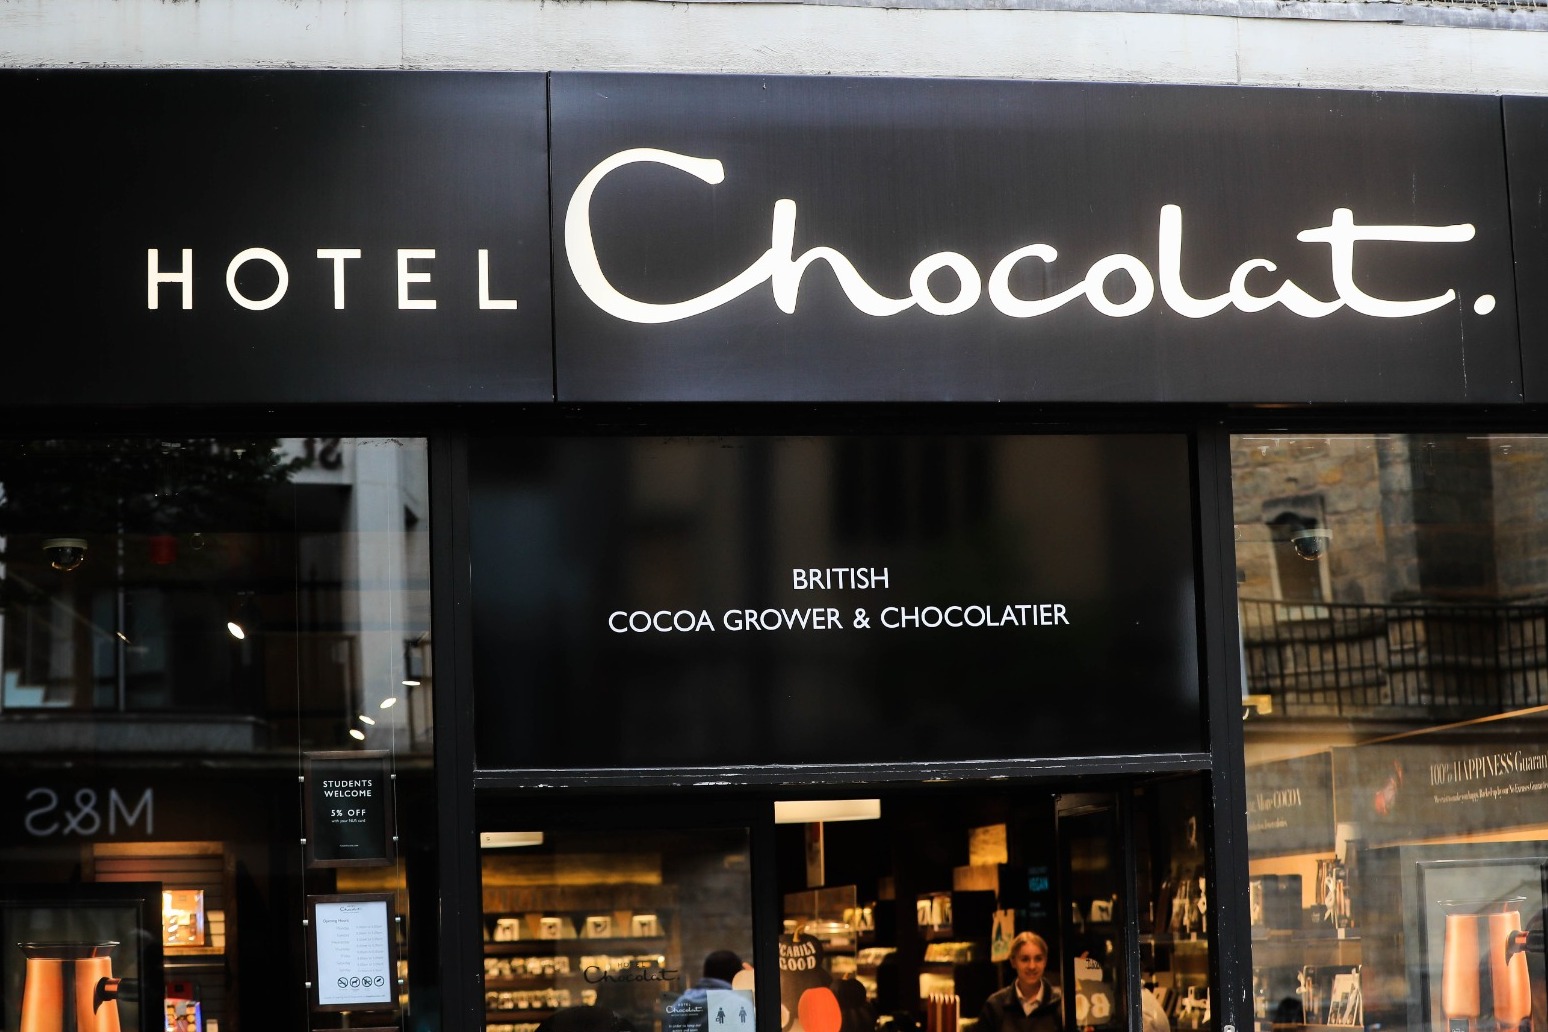 Hotel Chocolat shares melt after warning over annual losses 